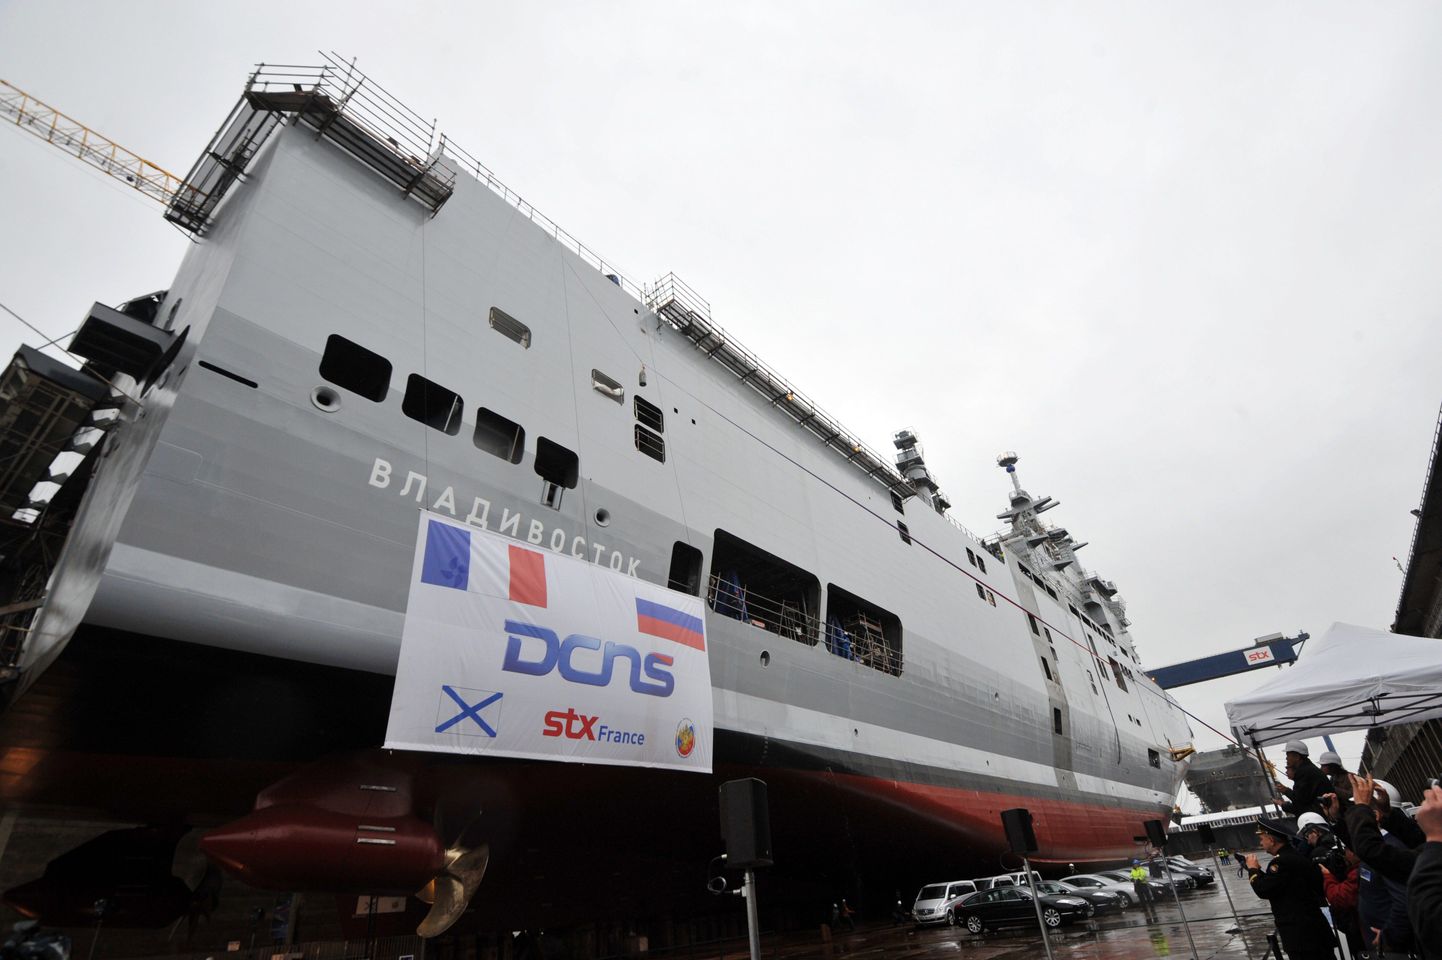 A picture taken on October 15, 2013 shows the Vladivostok warship, a Mistral class LHD amphibious vessel ordered by Russia, at the STX France shipyards in Saint-Nazaire, western France. AFP PHOTO/FRANK PERRY